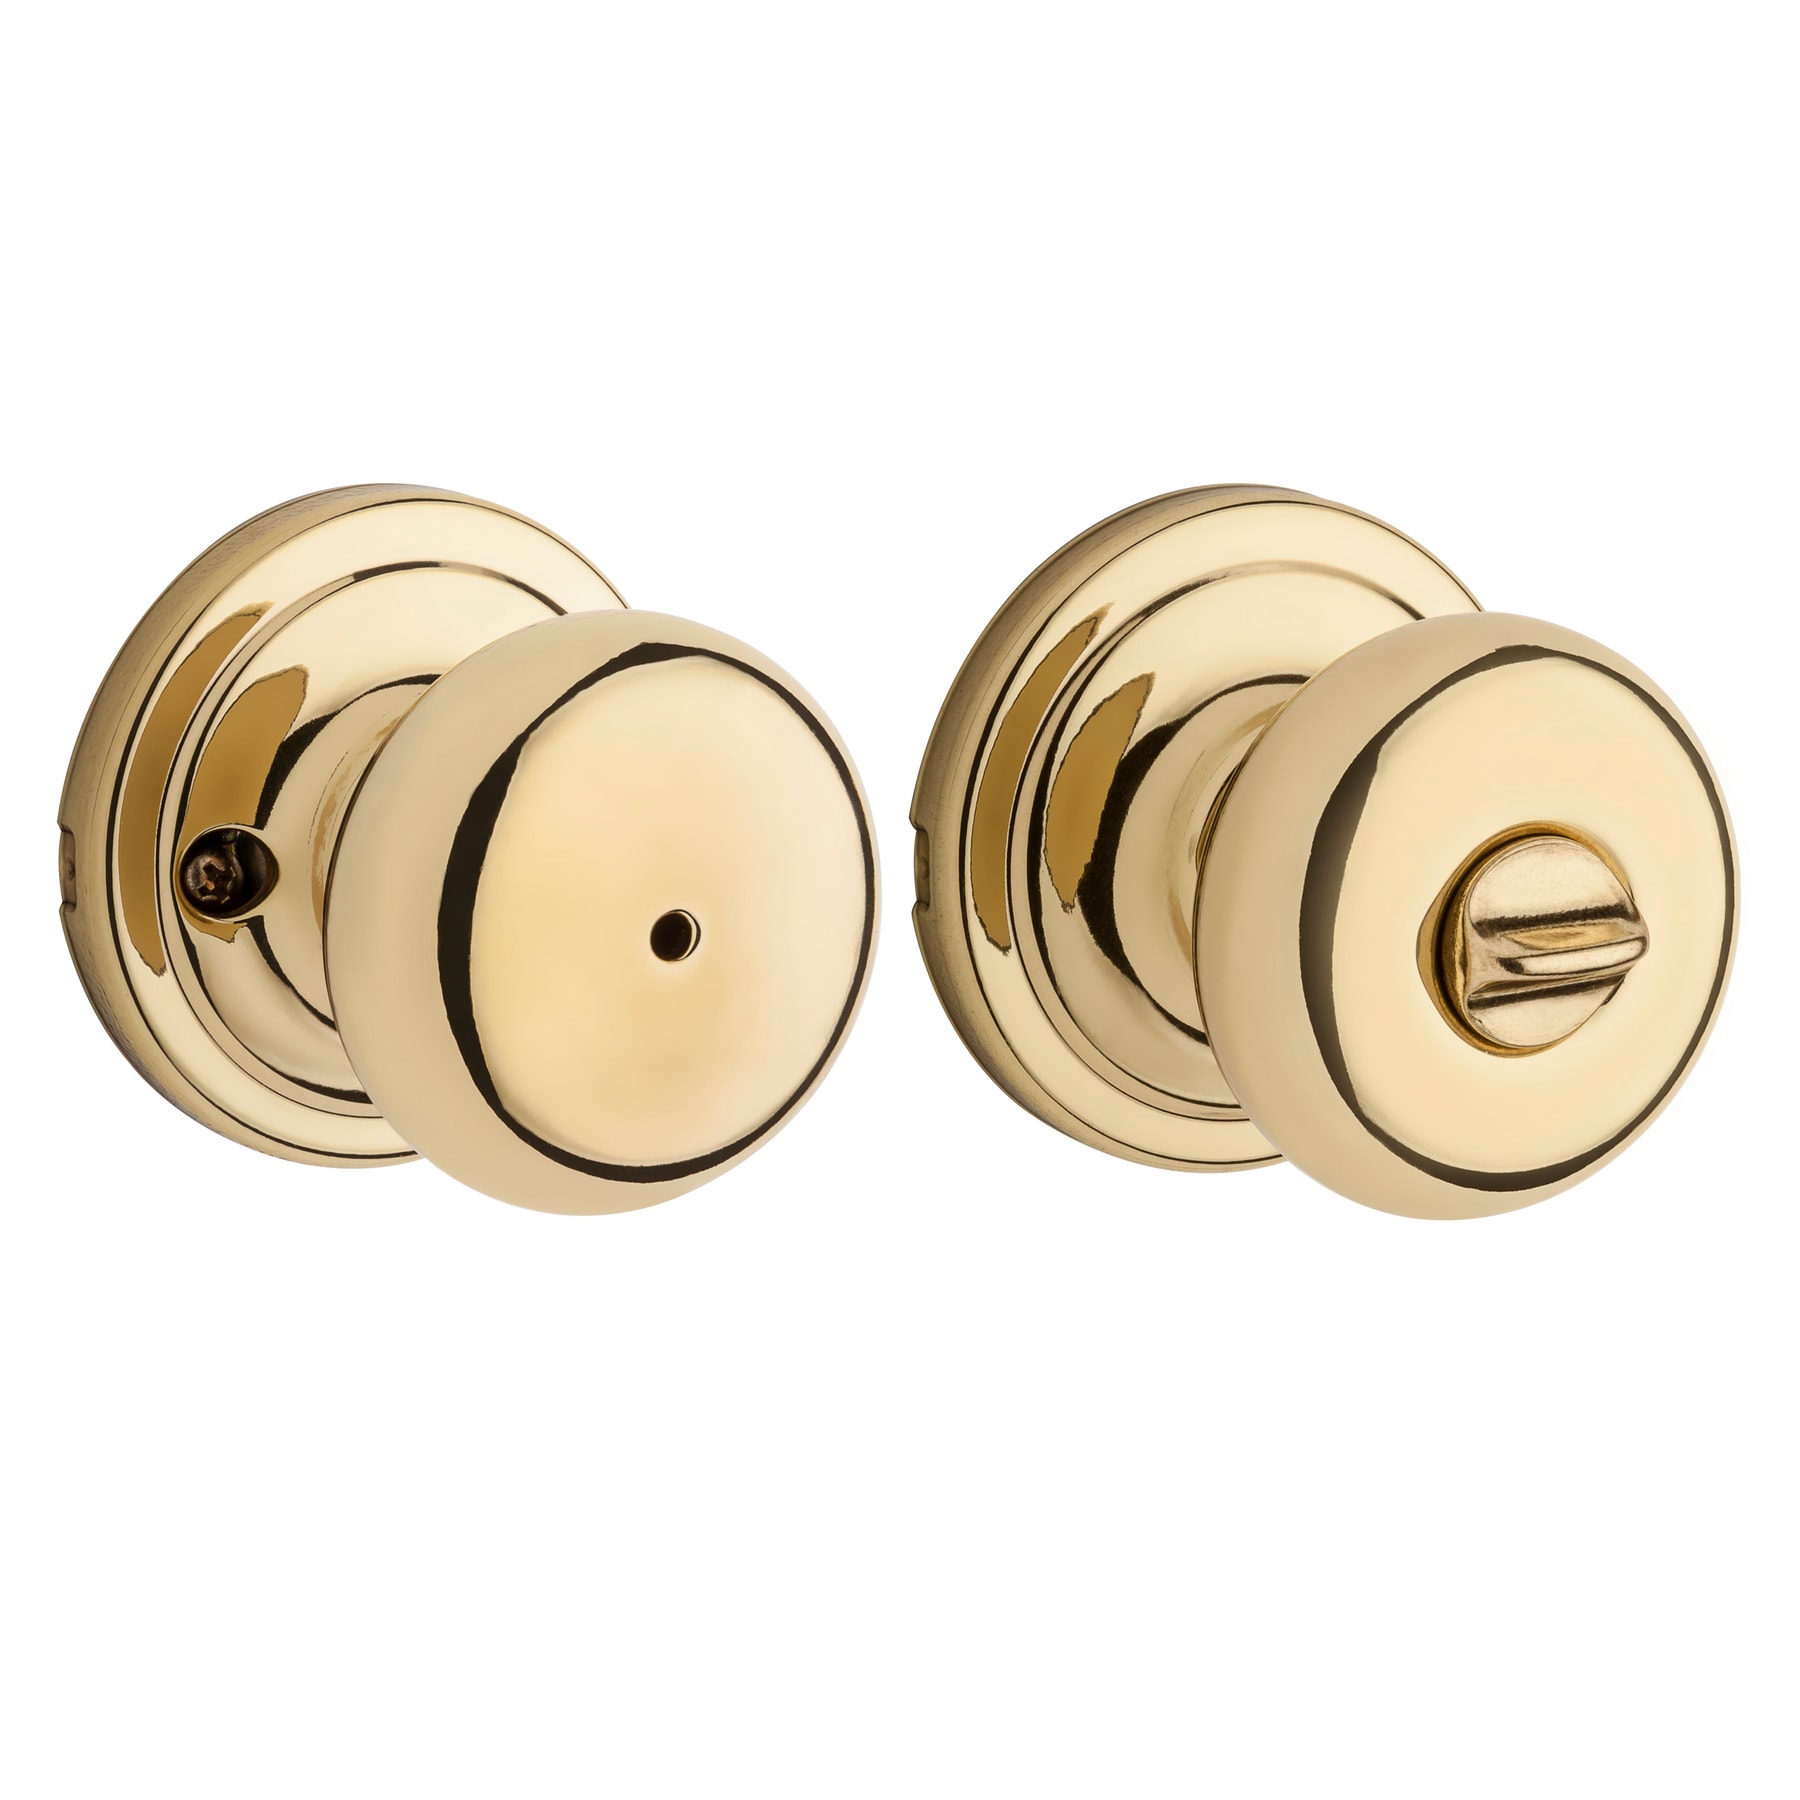 Signatures Hancock Polished Brass Interior Bed/Bath No Deadbolt Privacy Door Knob with Antimicrobial Technology in Gold | - Kwikset 730H 3 6AL RCS KI GC